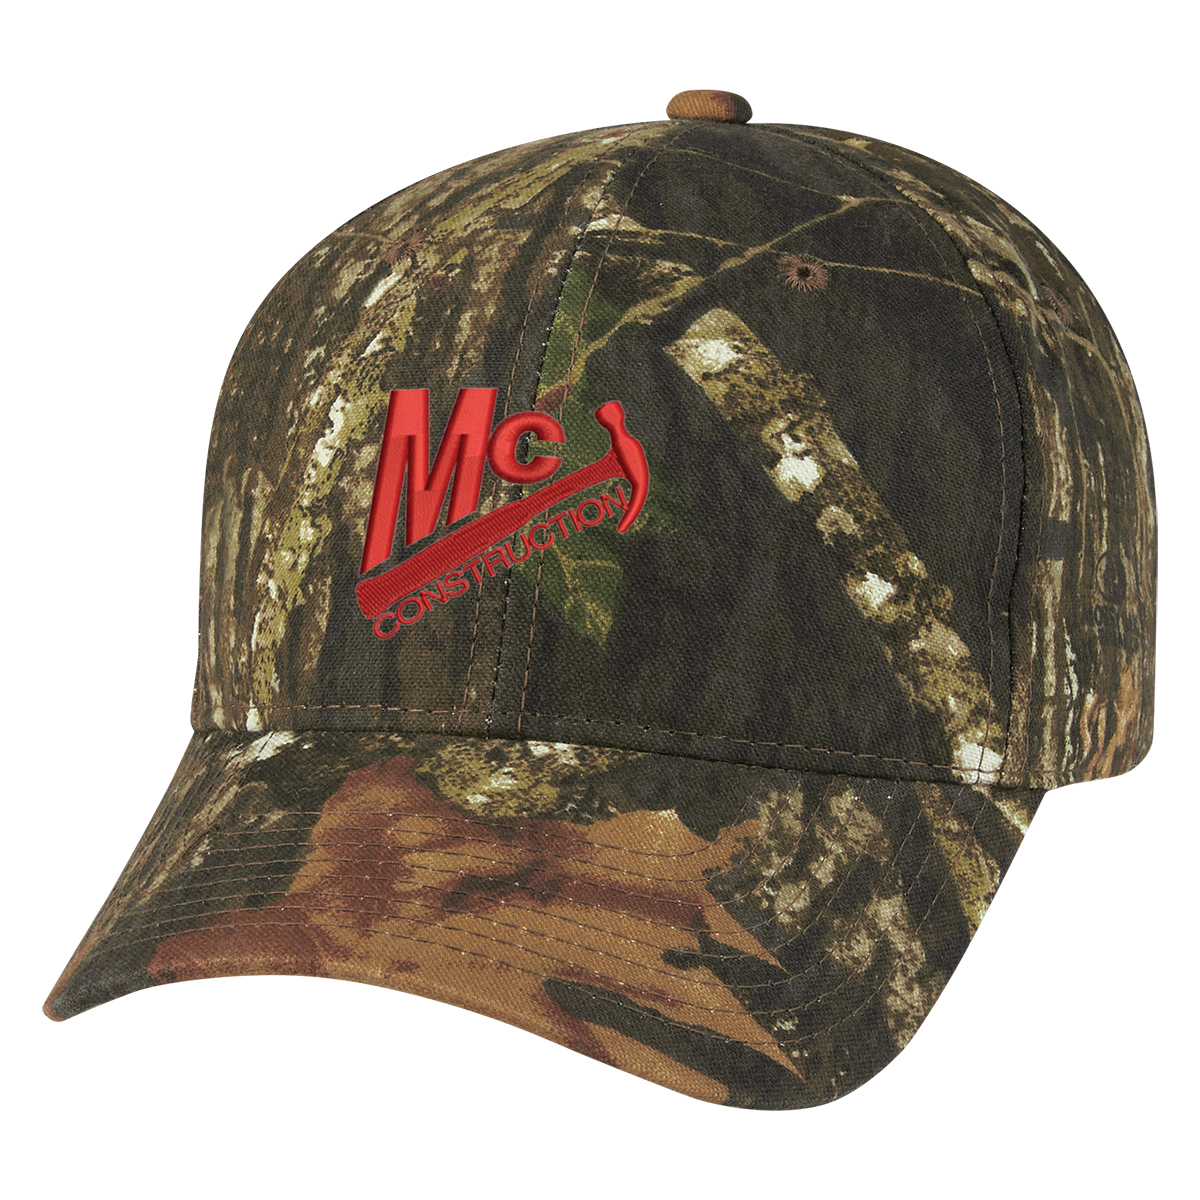 1060 Realtree® And Mossy Oak® Hunter's Retreat Camouflage Cap